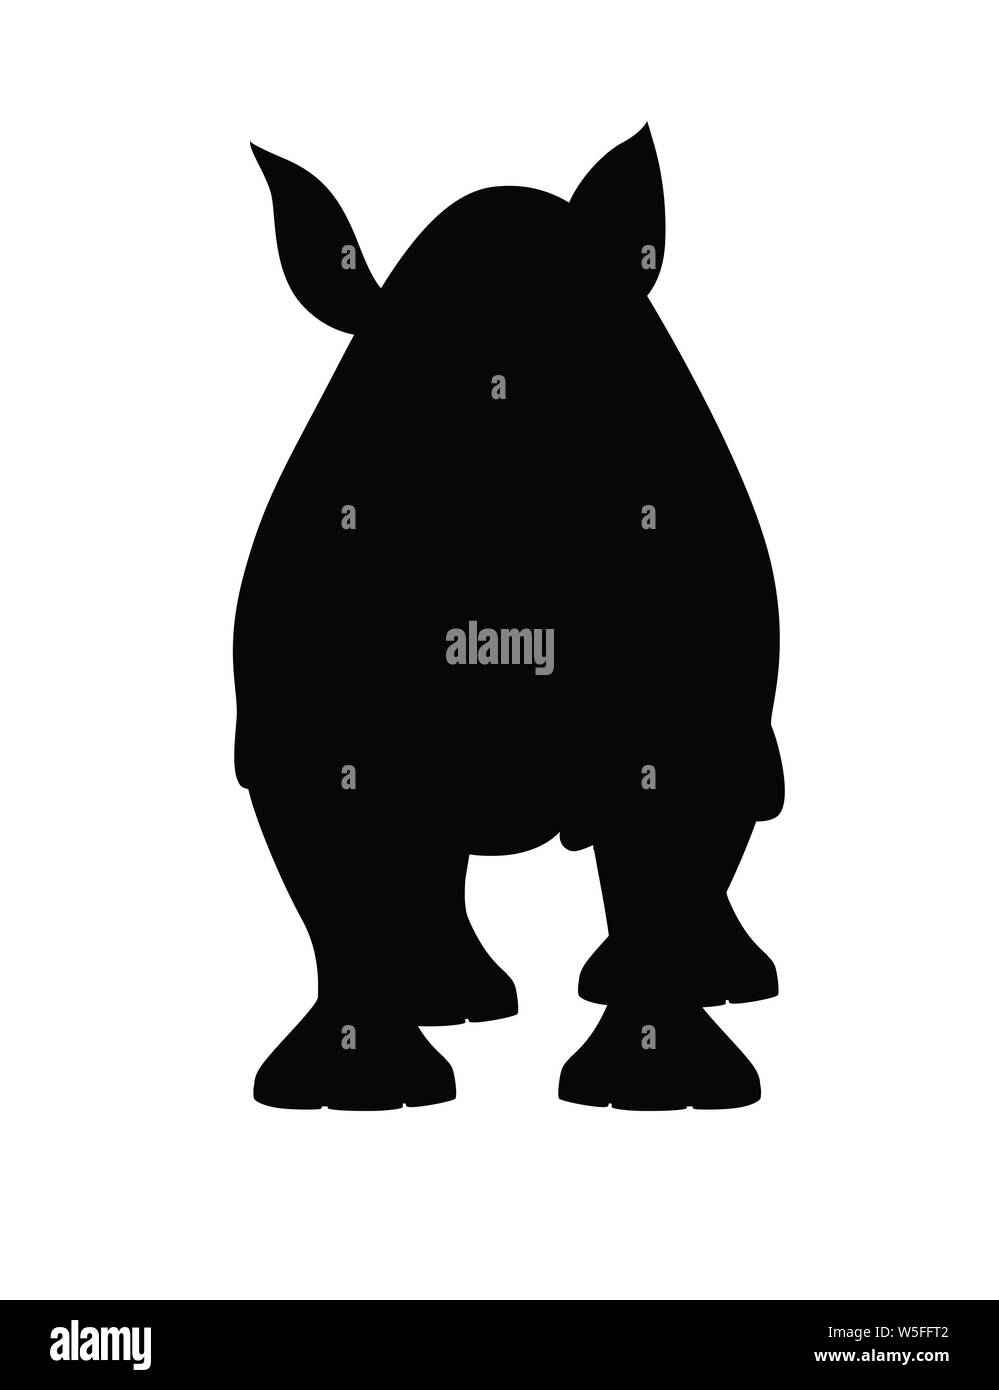 Black silhouette african rhinoceros front view cartoon animal design flat vector illustration isolated on white background. Stock Vector